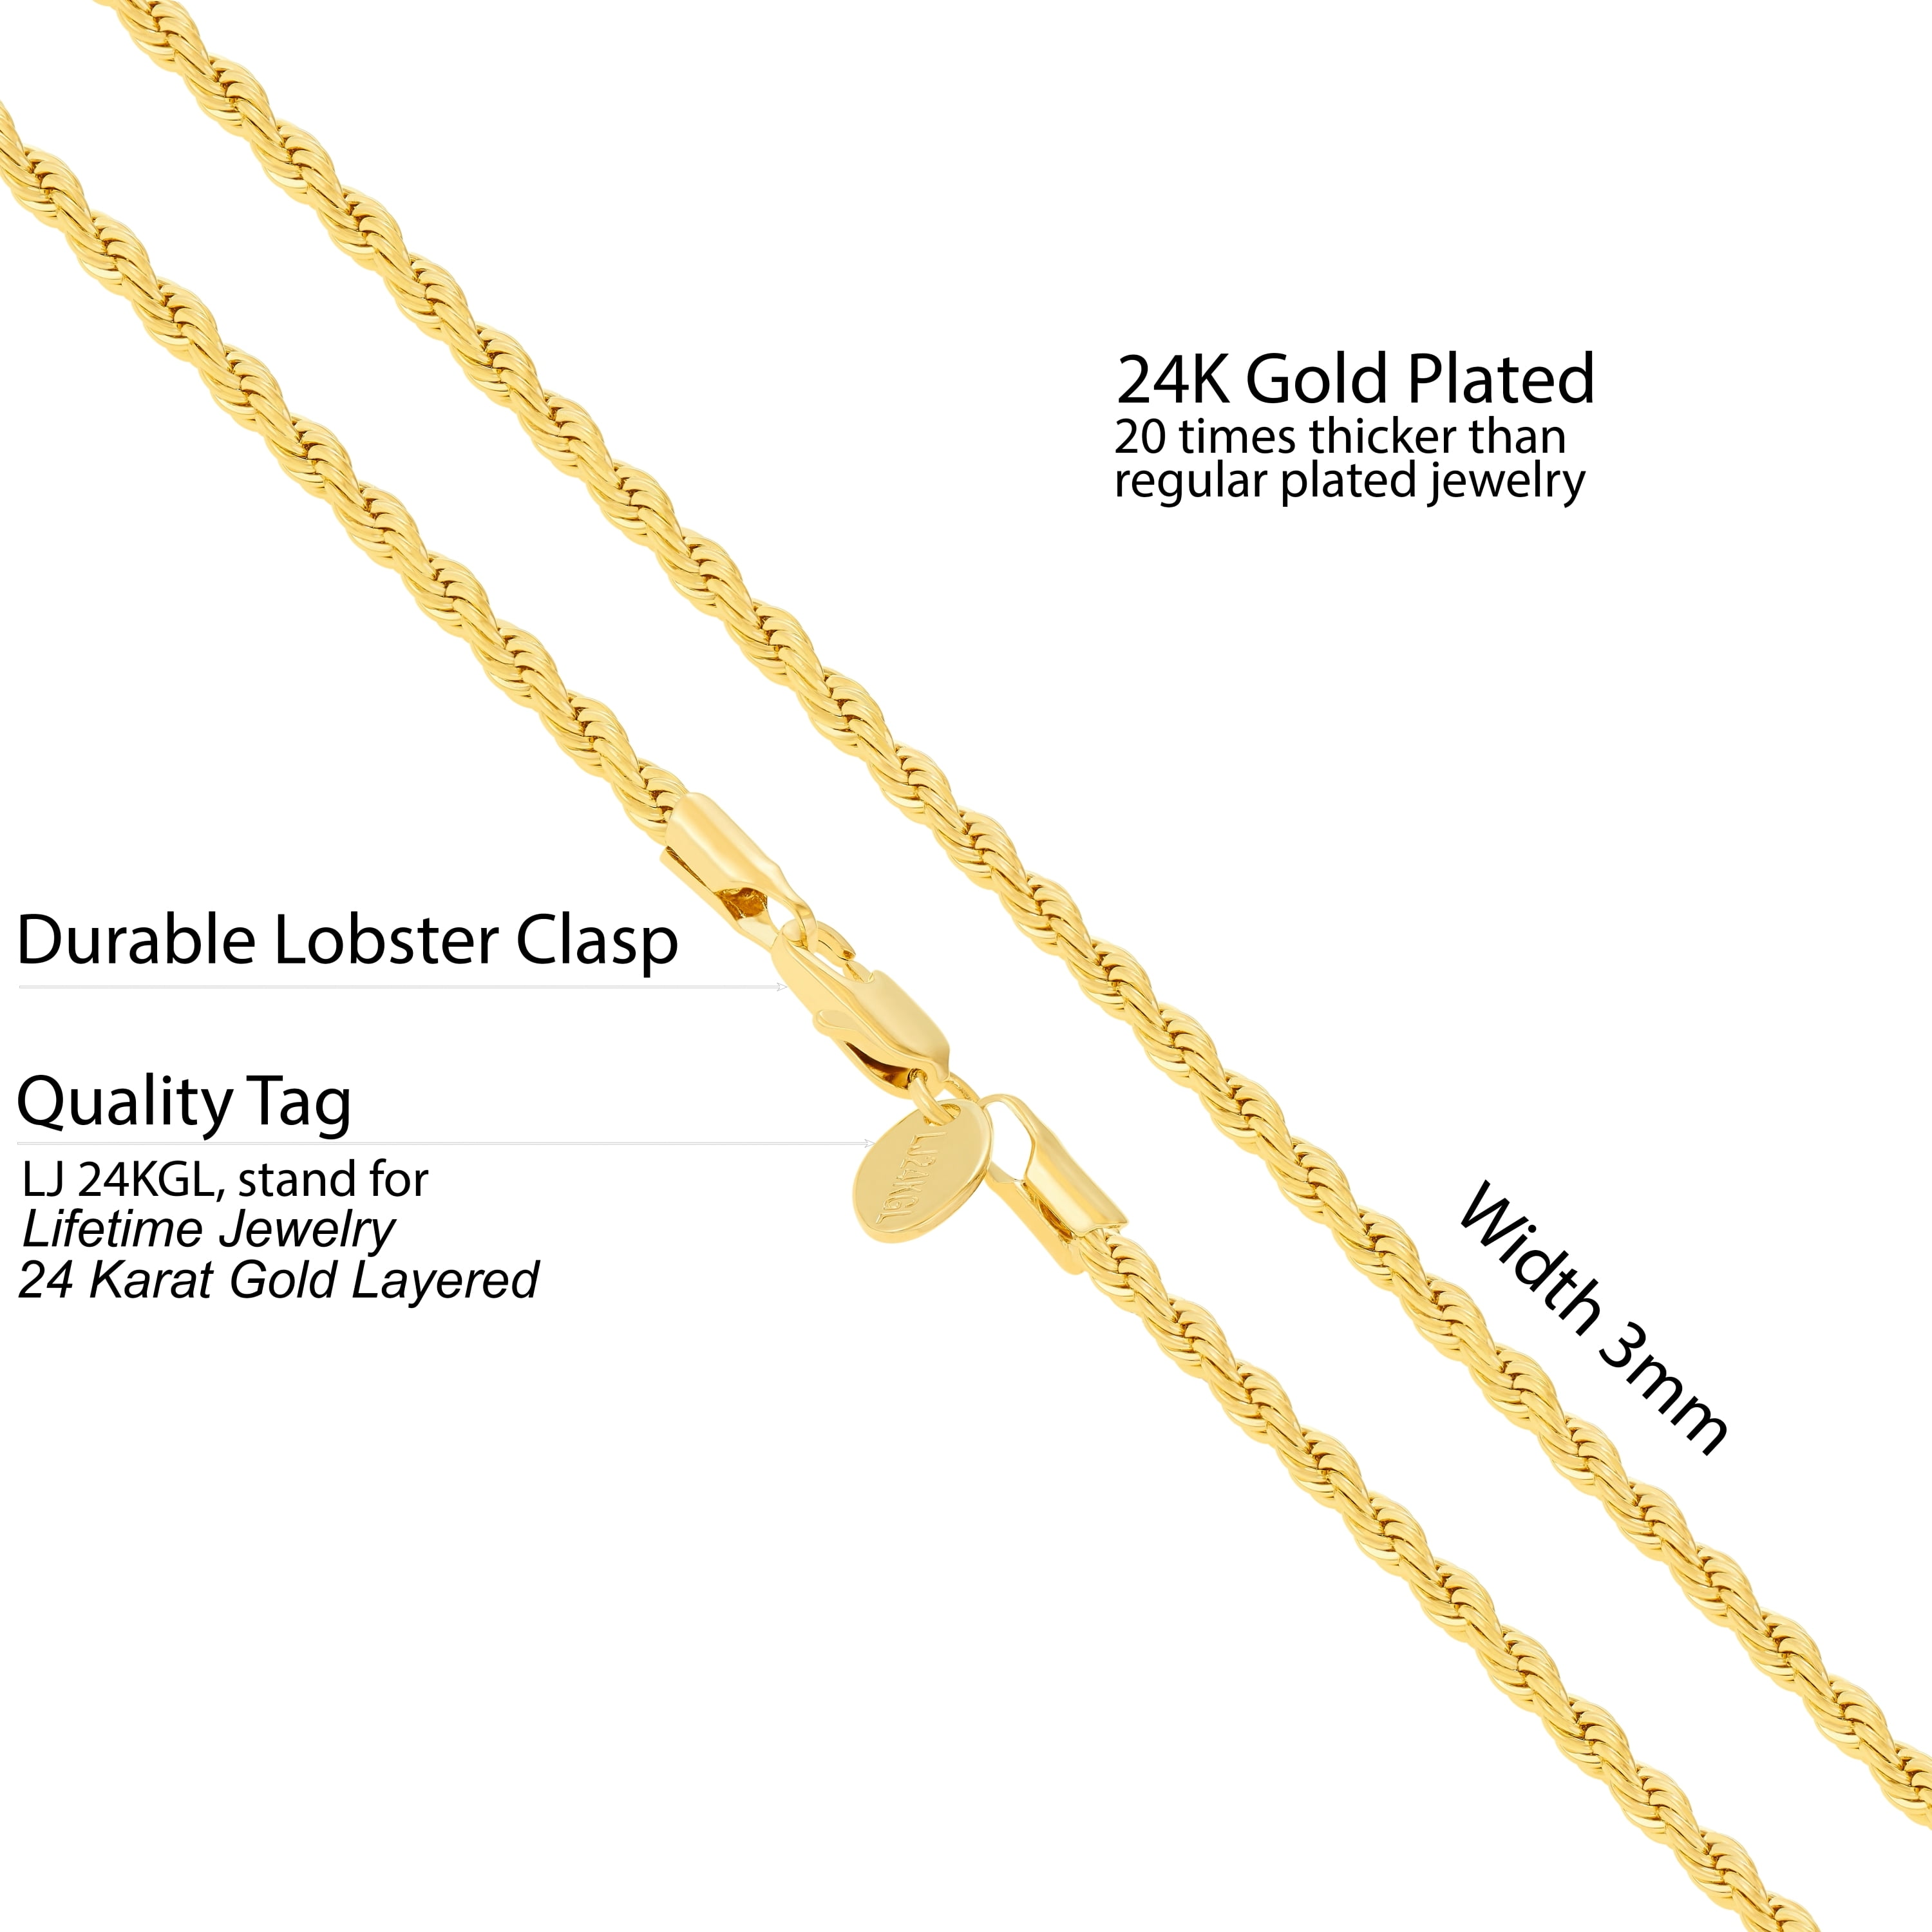 LIFETIME JEWELRY 3mm Rope Chain Necklace 24k Real Gold Plated